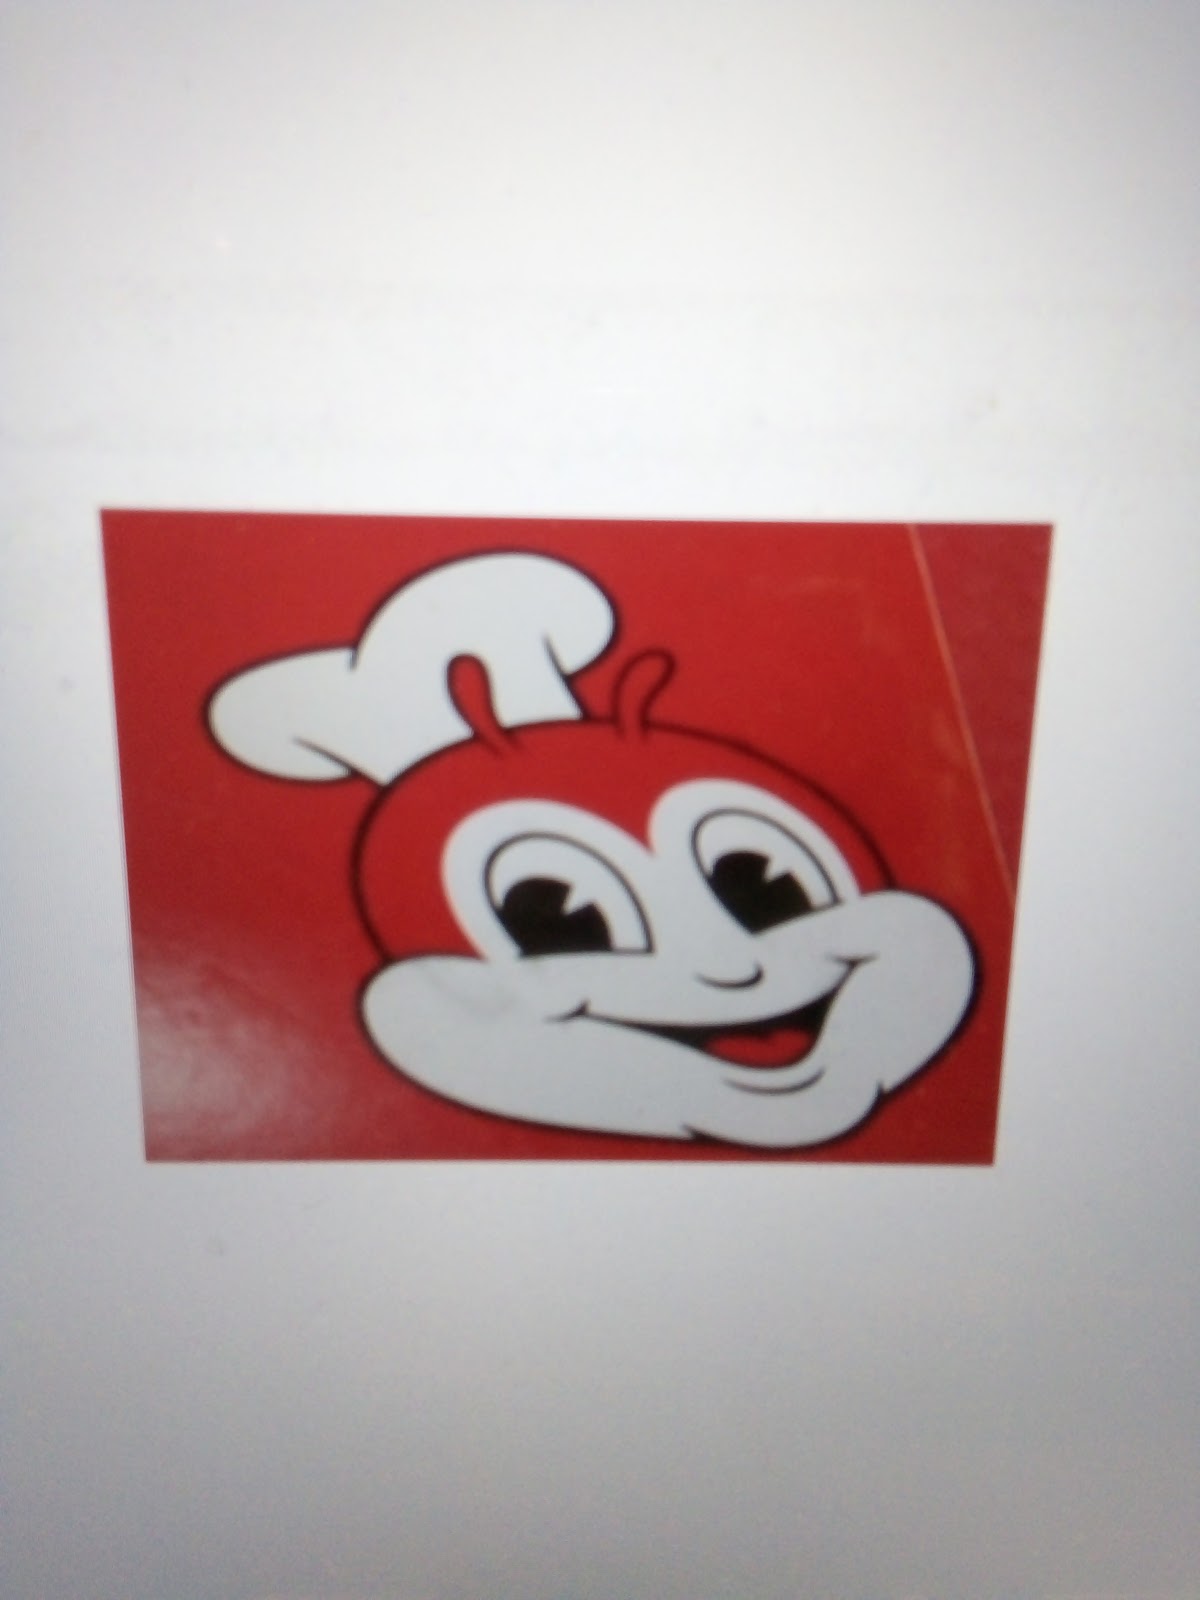 Jollibee In Winnipeg Canada カナダのウィニペグのジョリビー いつか洋画を字幕なしで Someday I D Like To Be Able To Watch Movies Without Subtitles